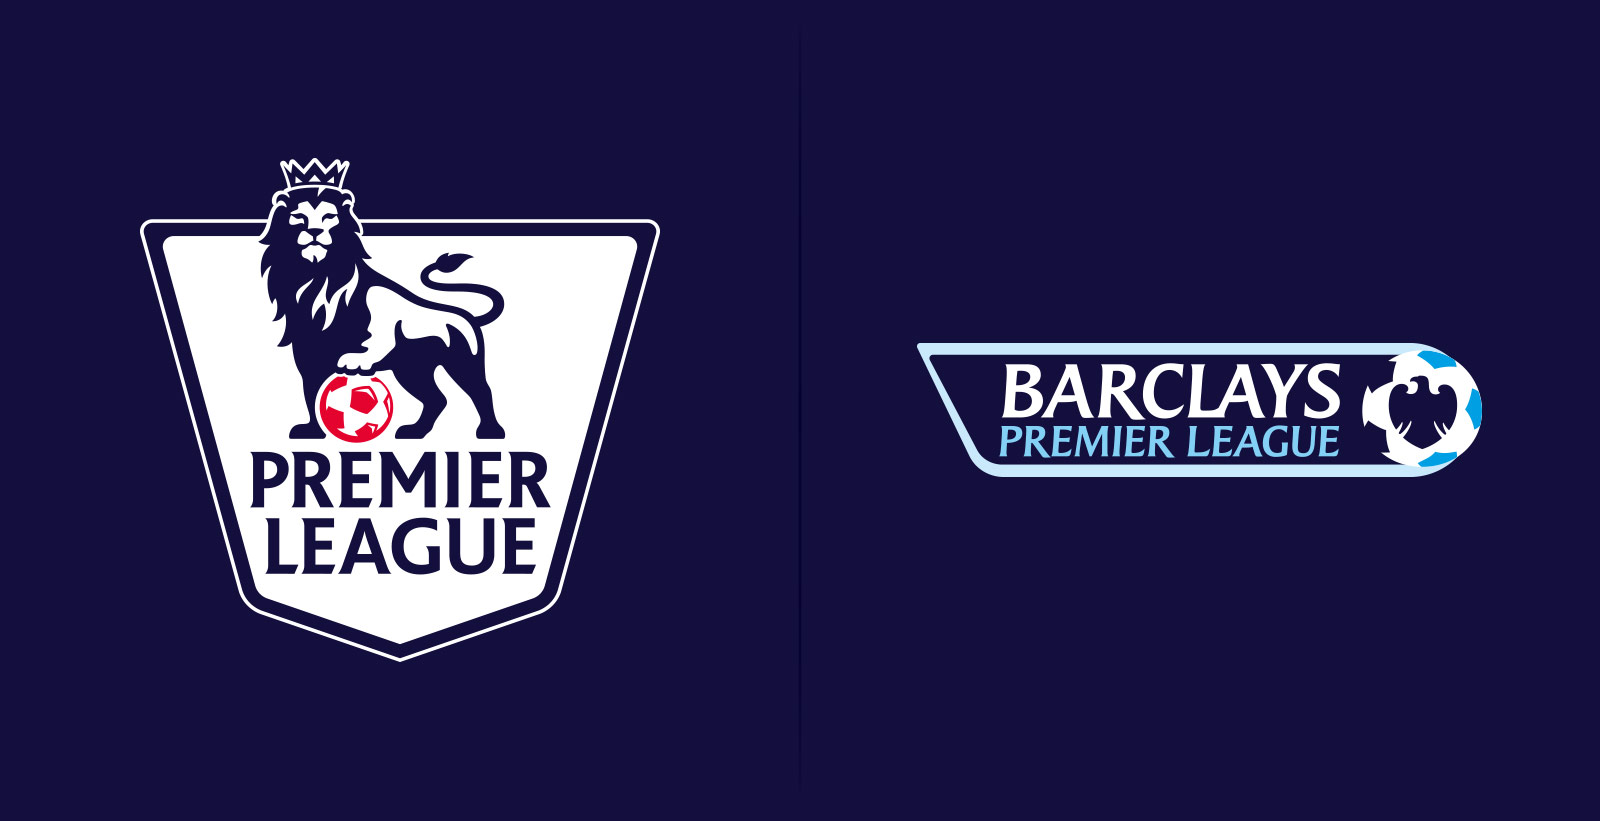 premier-league-logo-to-be-changed